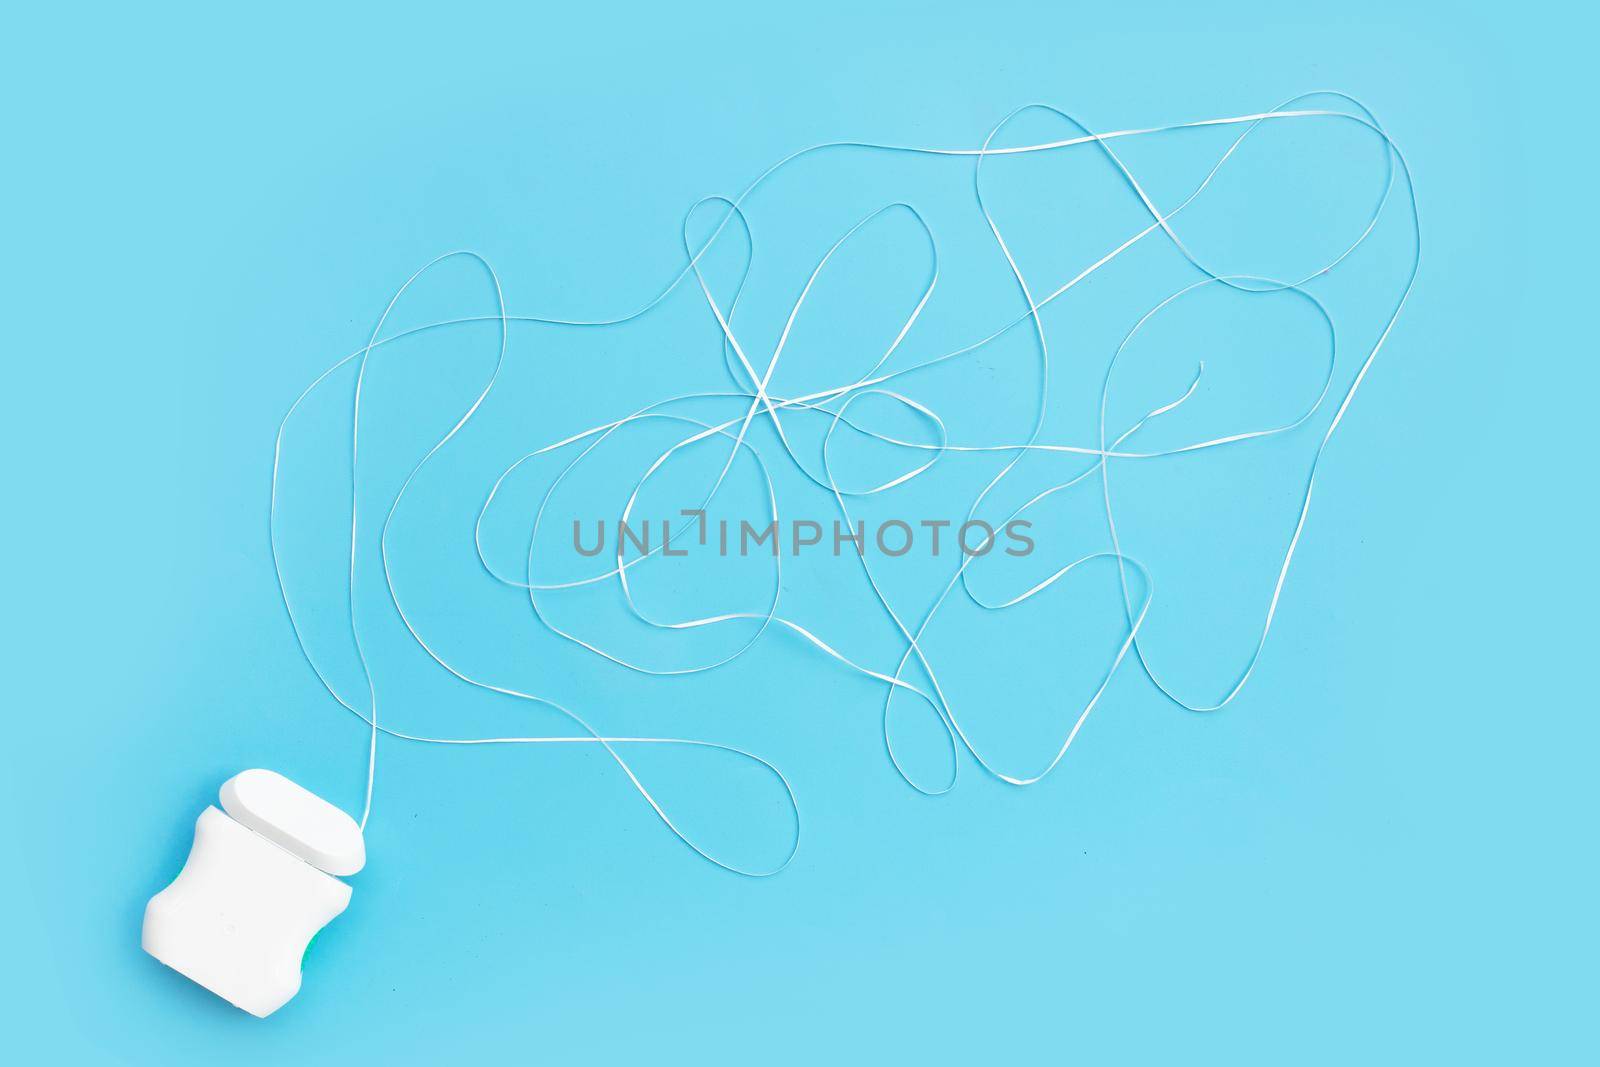 Dental floss on blue background. Copy space